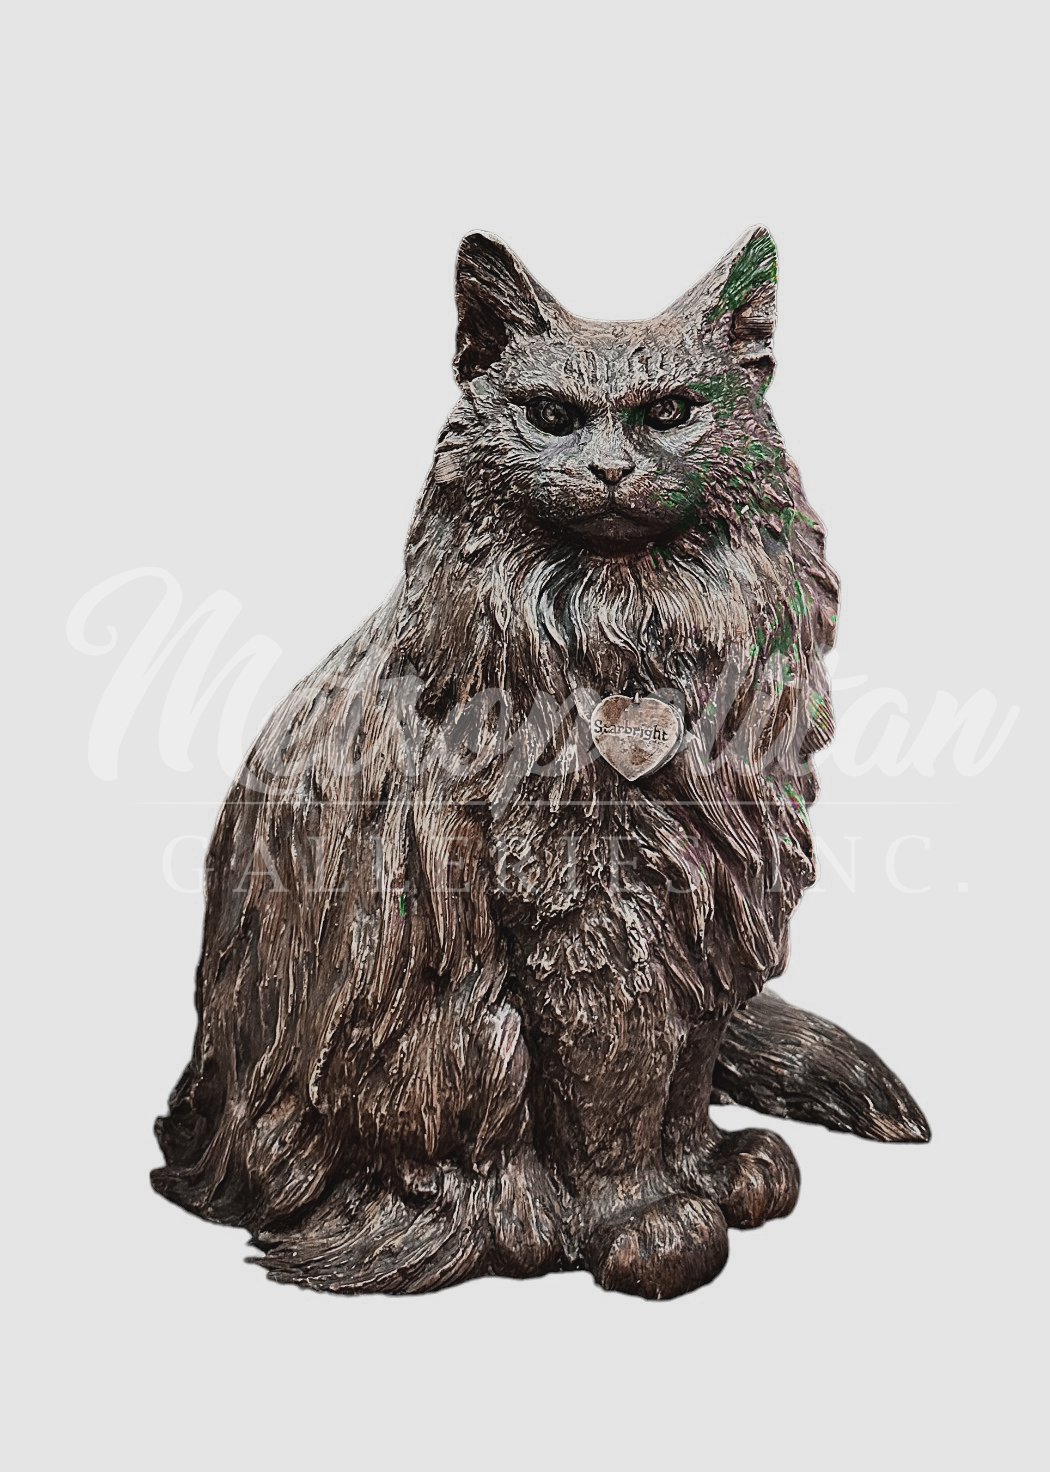 Bronze Starbright Maine Coon Cat Sculpture exclusively designed and produced by Metropolitan Galleries Inc